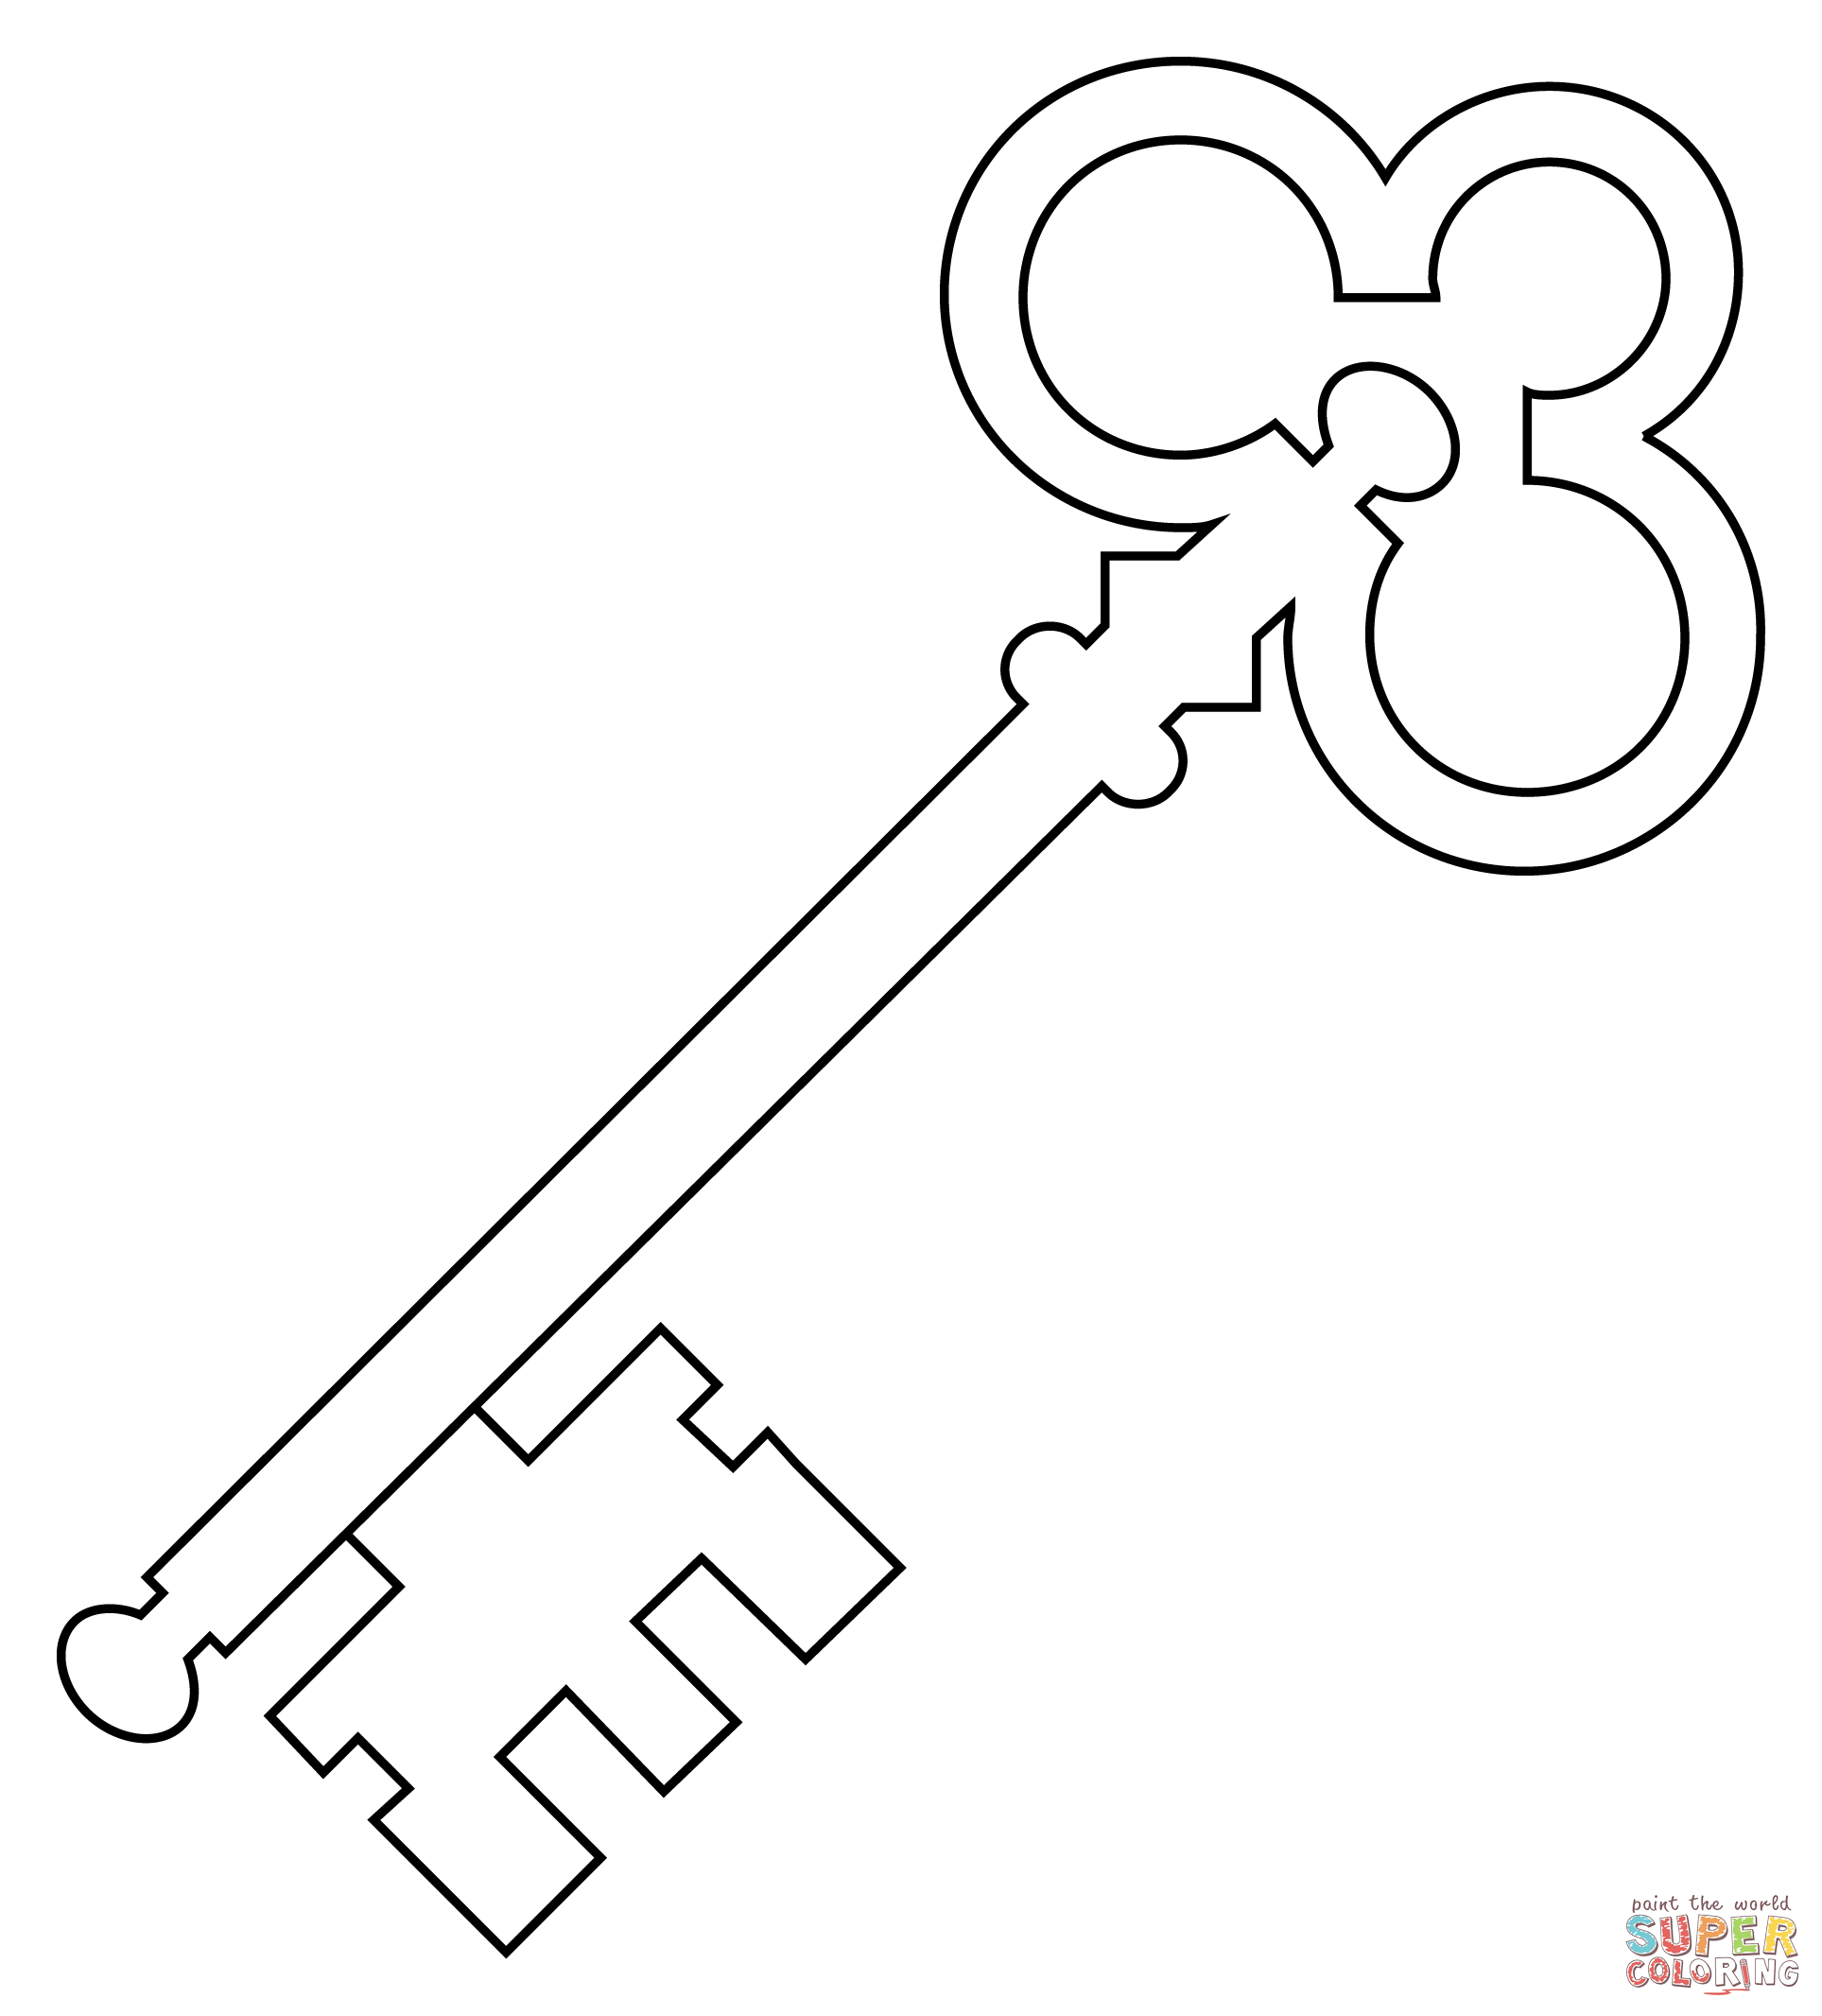 Old key coloring page free printable coloring pages